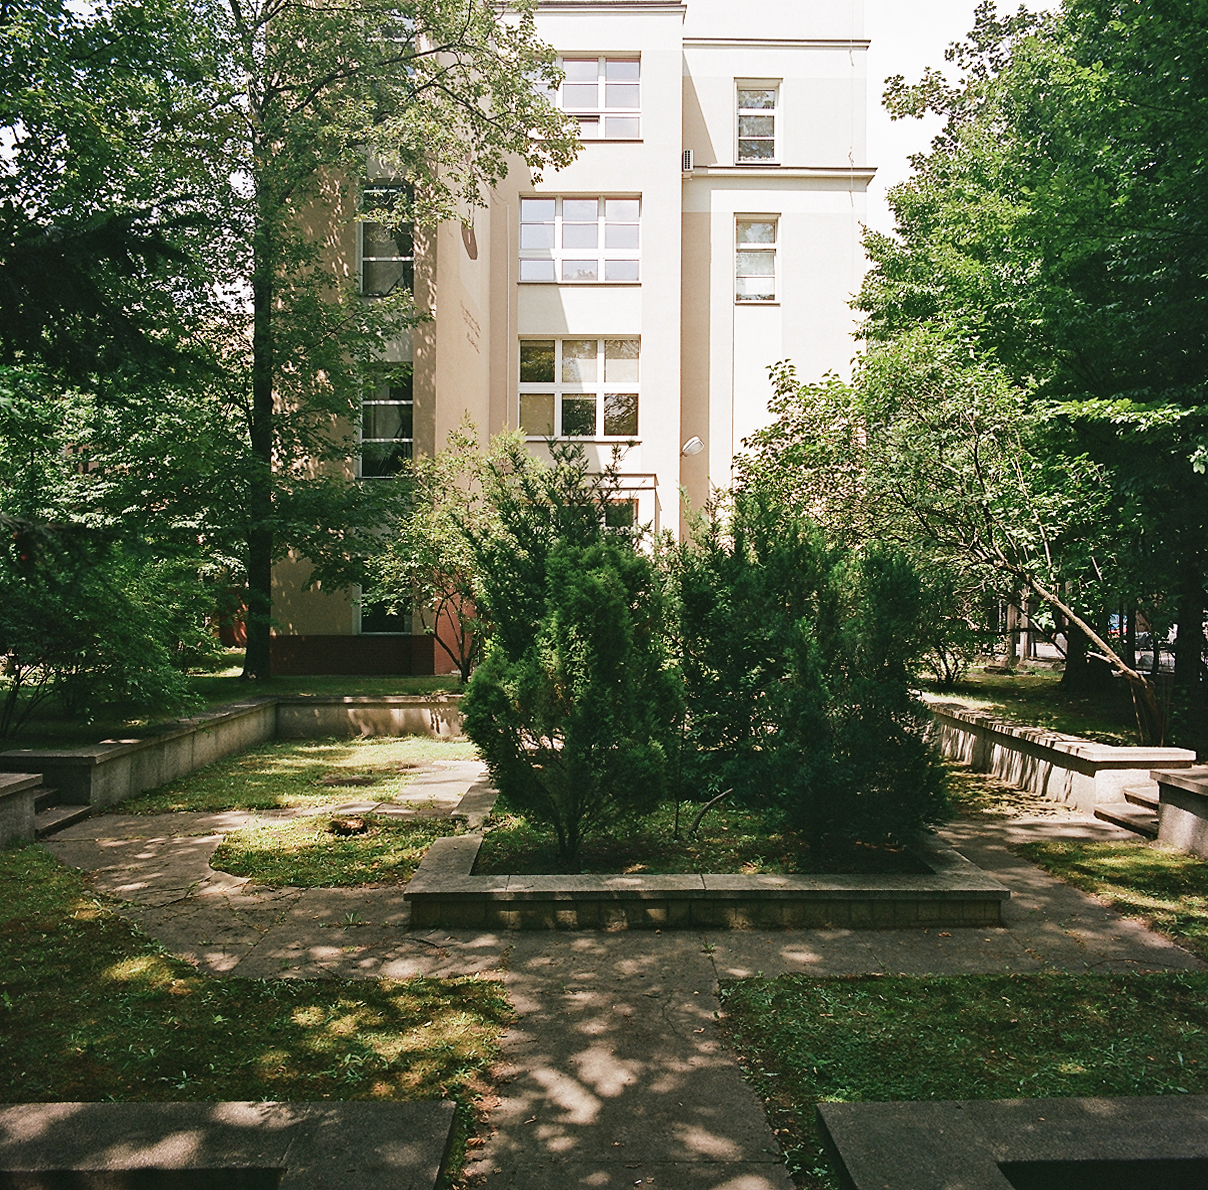 The pool in the garden of the Radium Institute, inaugurated by Maria Skłodowska-Curie in 1925 on Wawelska Street in Warsaw. The pond needs to be emptied, repaired, the stylised with features of the small architecture and replanted with aquatic plants.